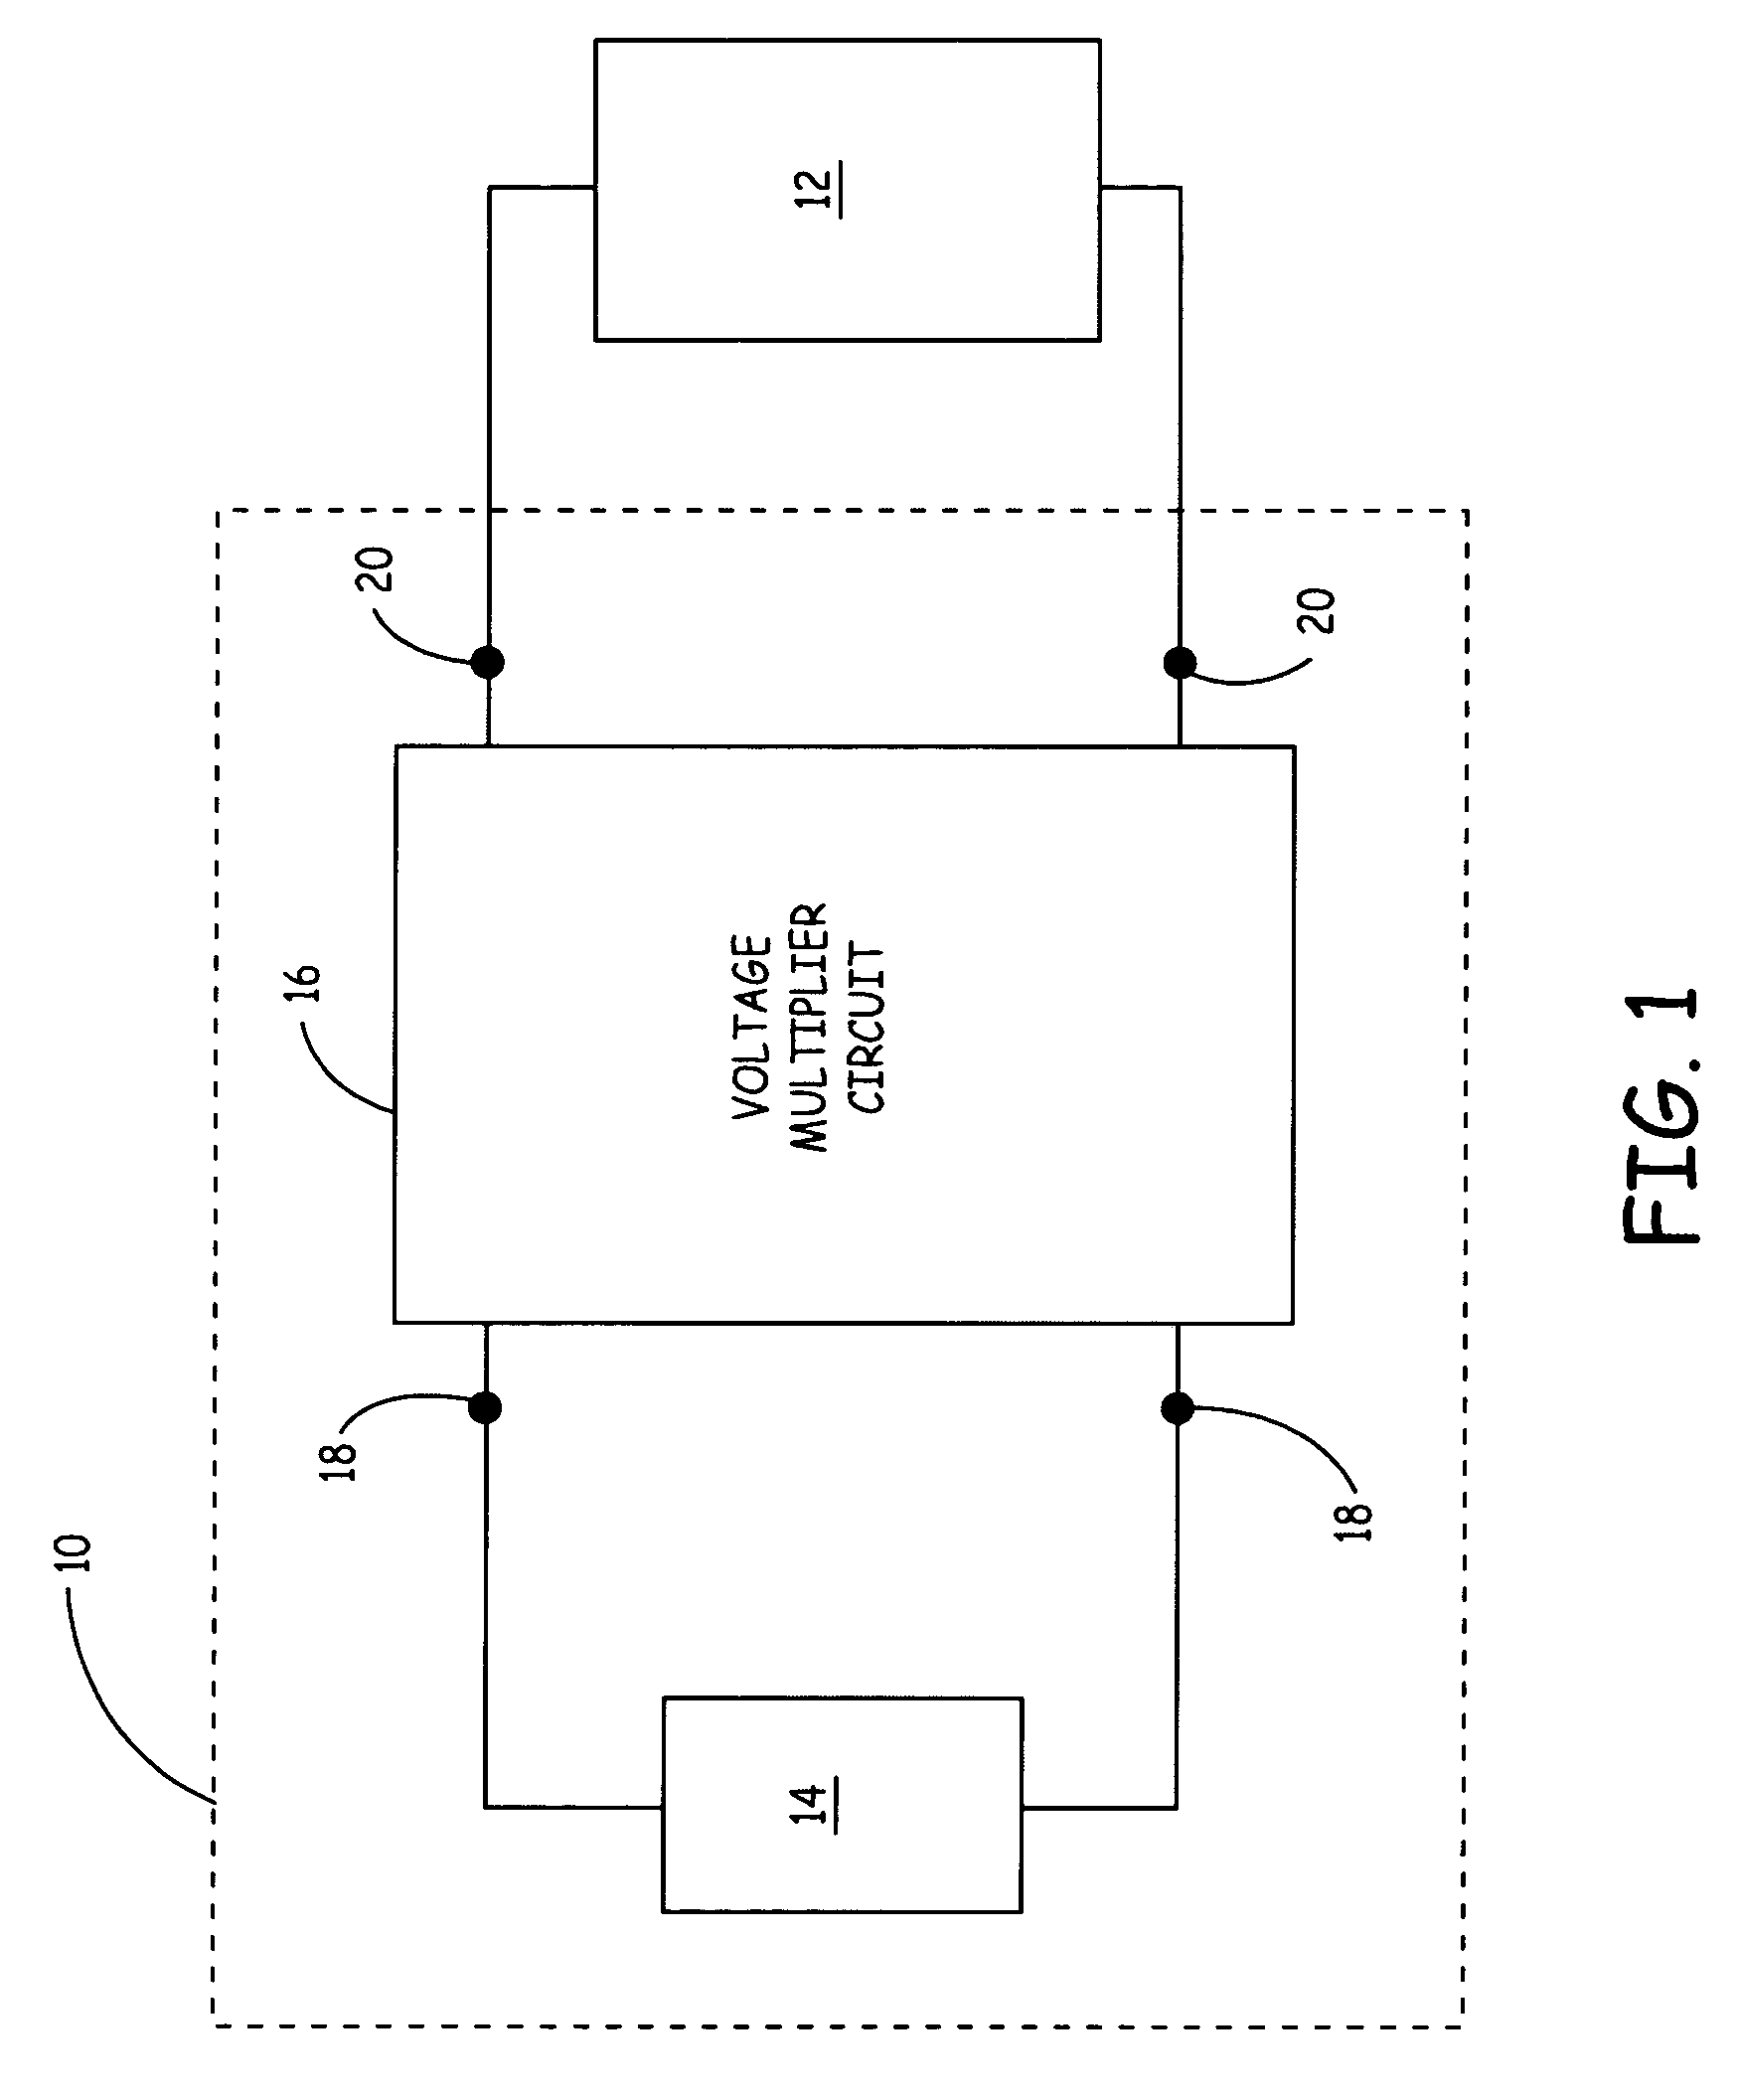 Apparatus and method for counteracting self discharge in a storage battery